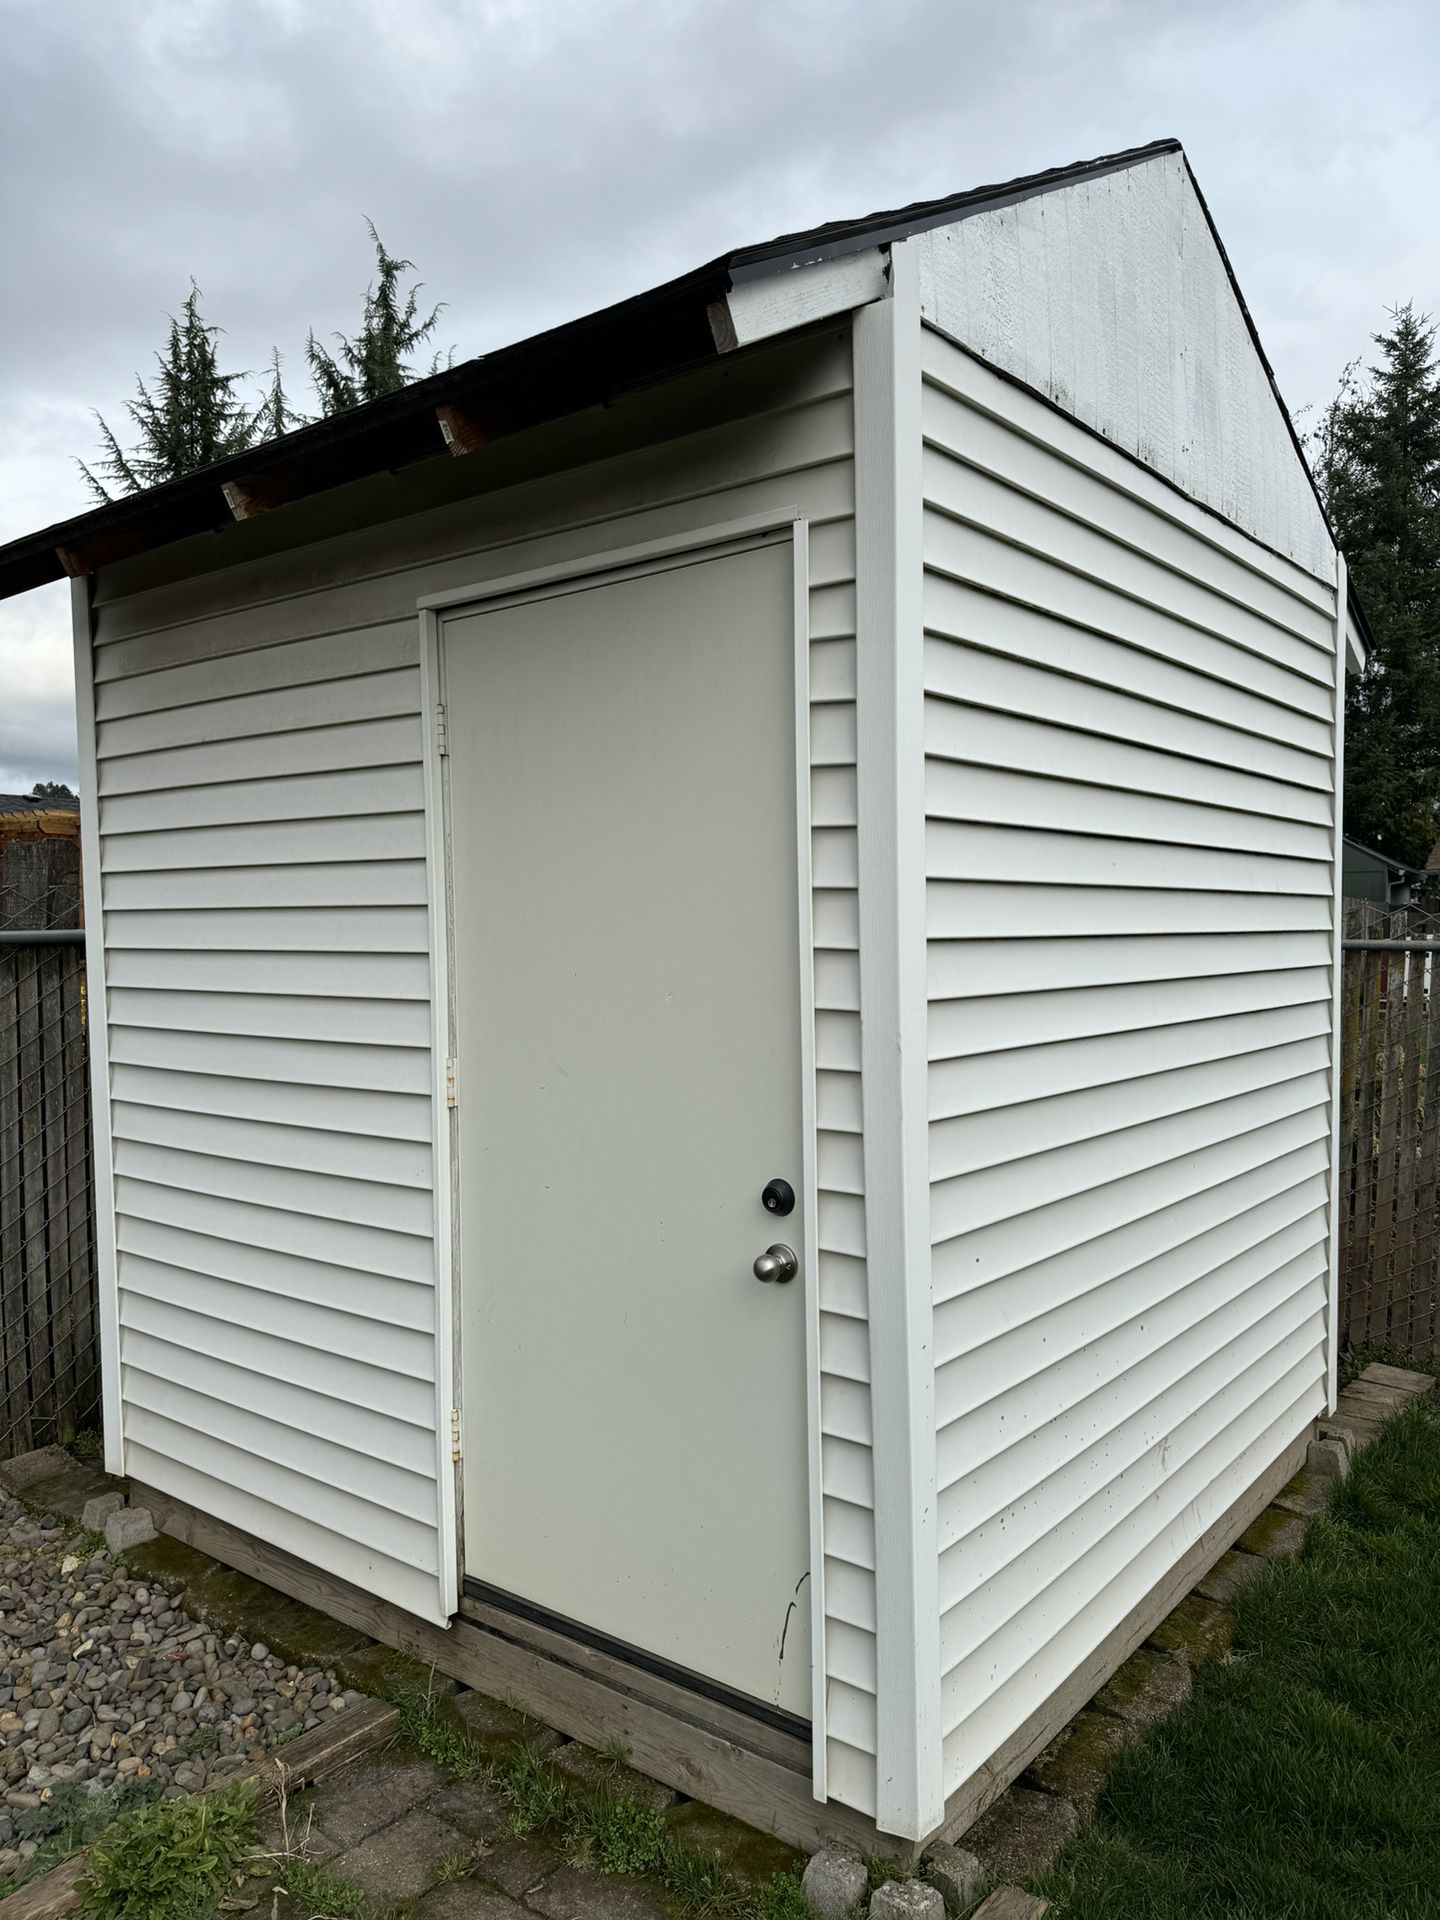 Shed In Great Condition $500 OBO 